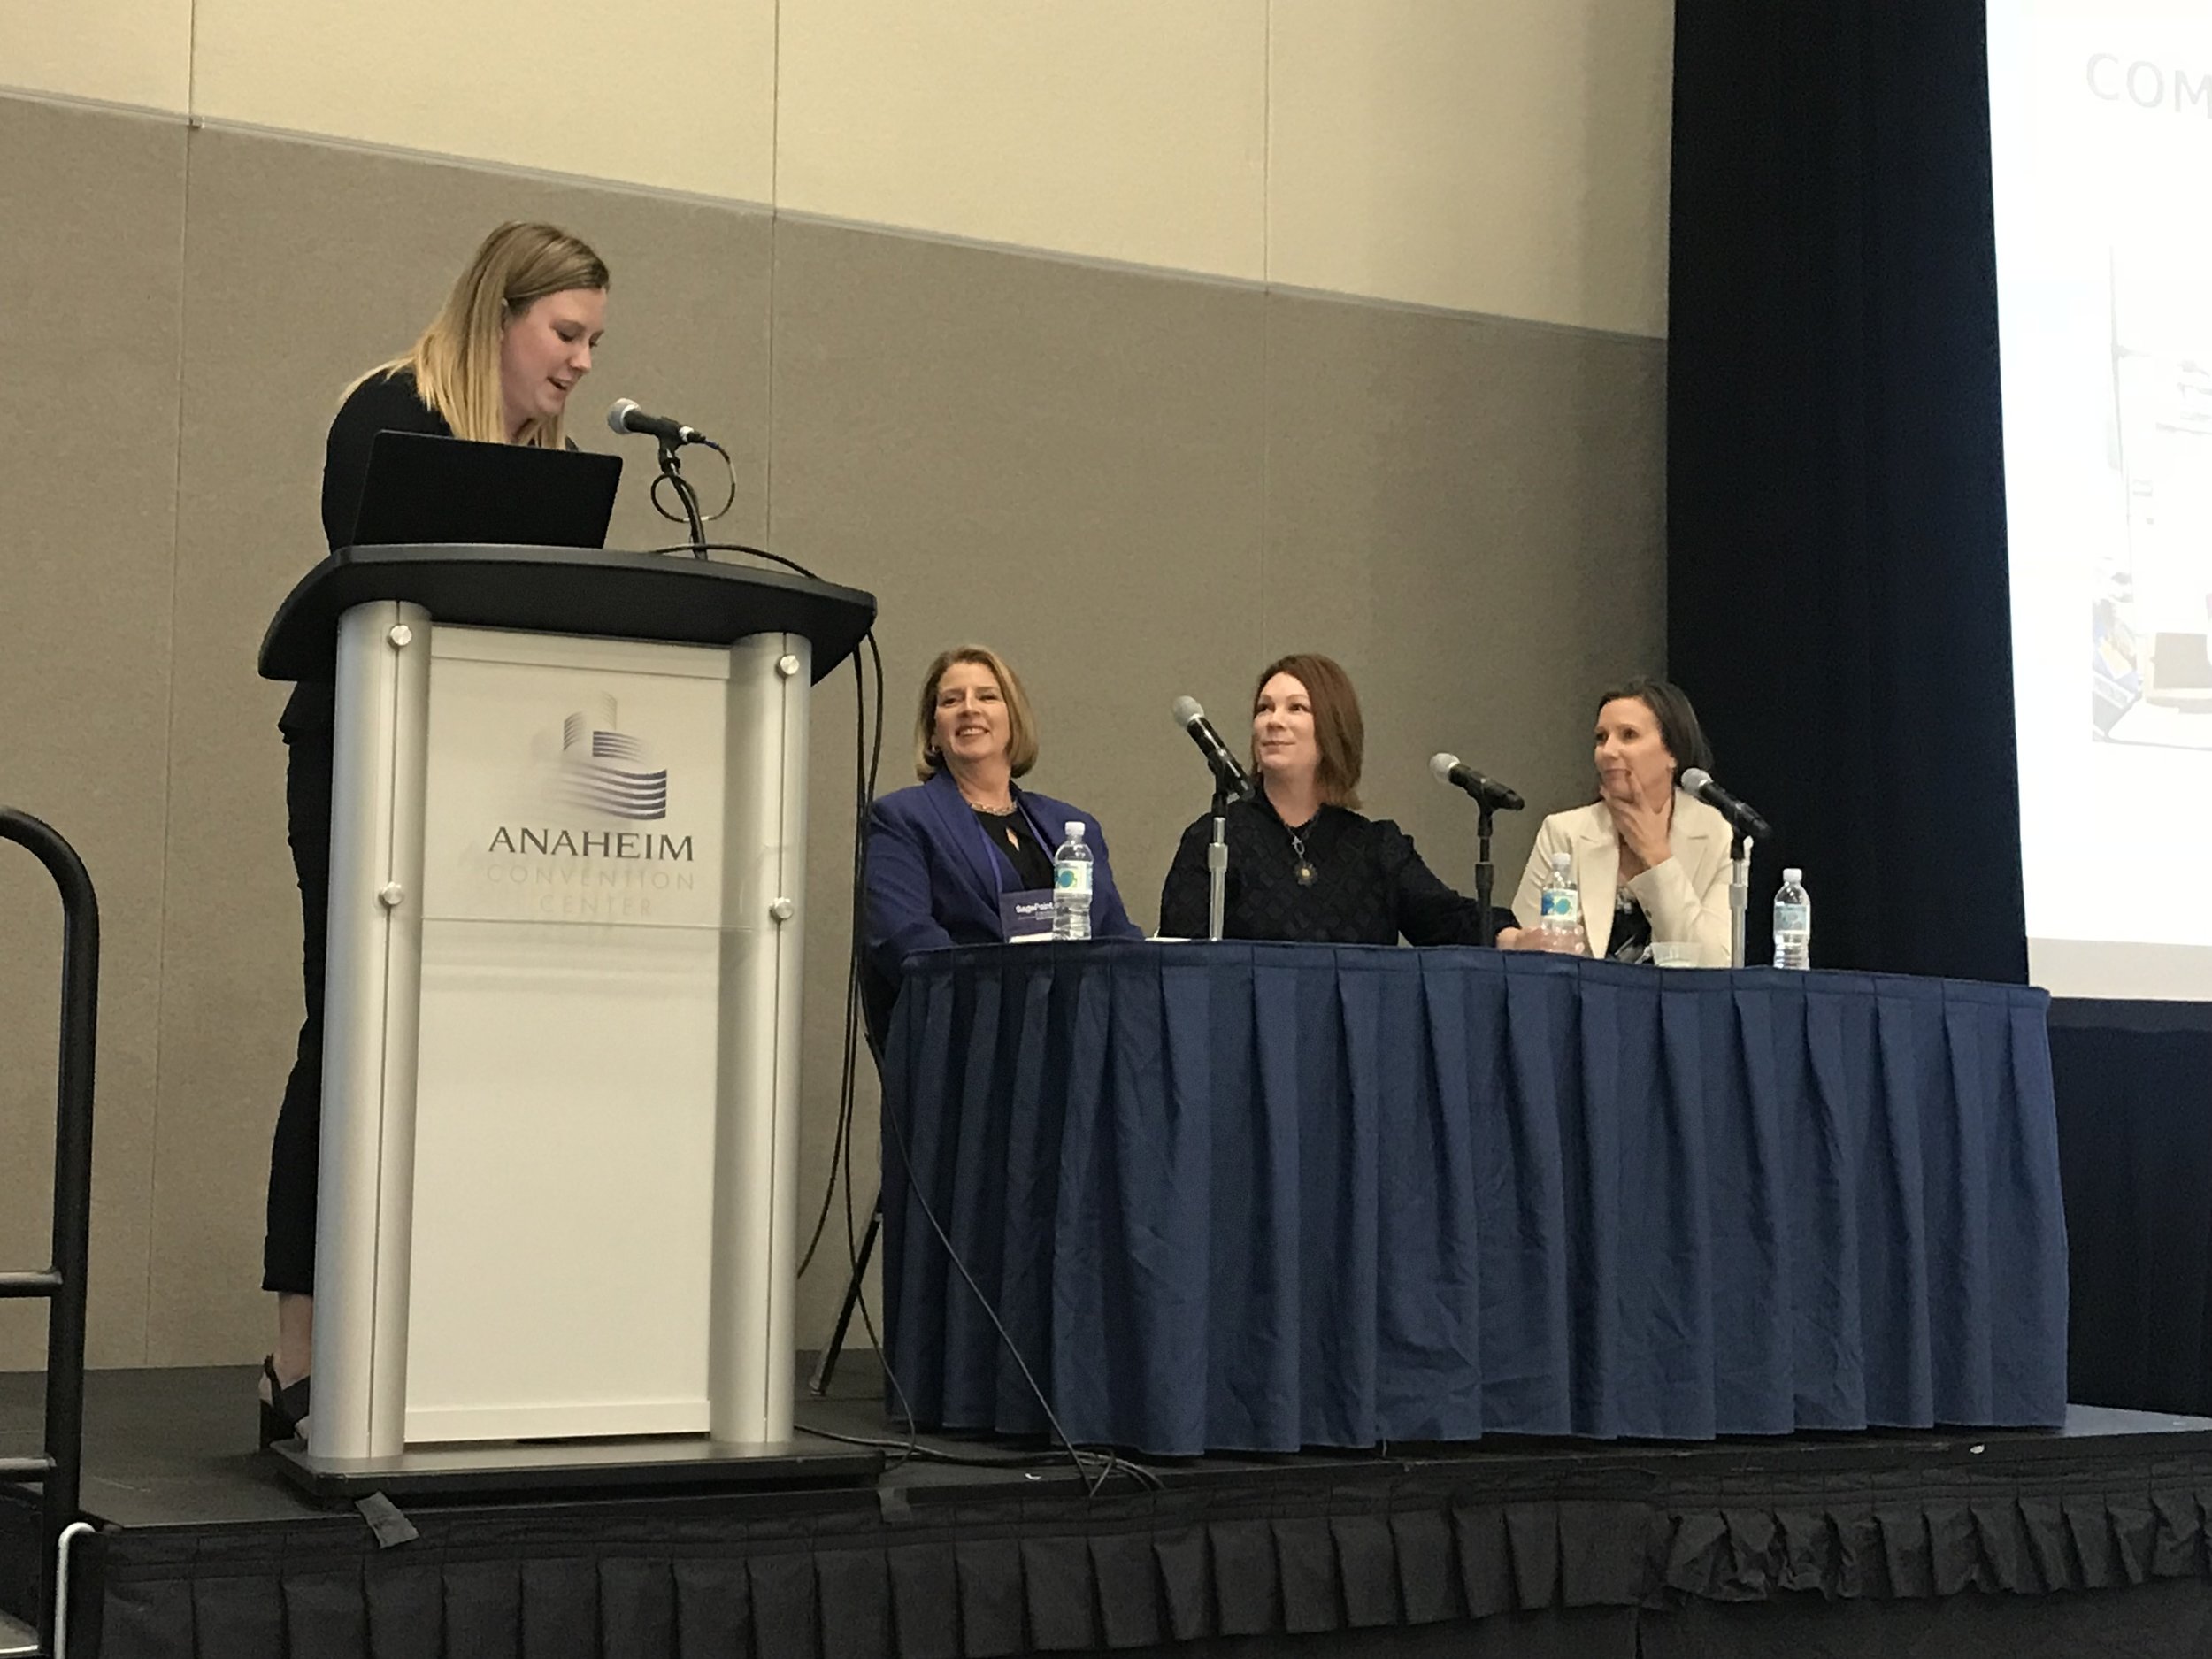  Cofounder of The W Source™ Hannah Buschbom (far left) presenting “Building a Female-Centric Professional Network: The Key to a Successful Practice” at the Advisor Group ConnectEd Conference in Anaheim, CA with panelists Michele Leach (left), Michell